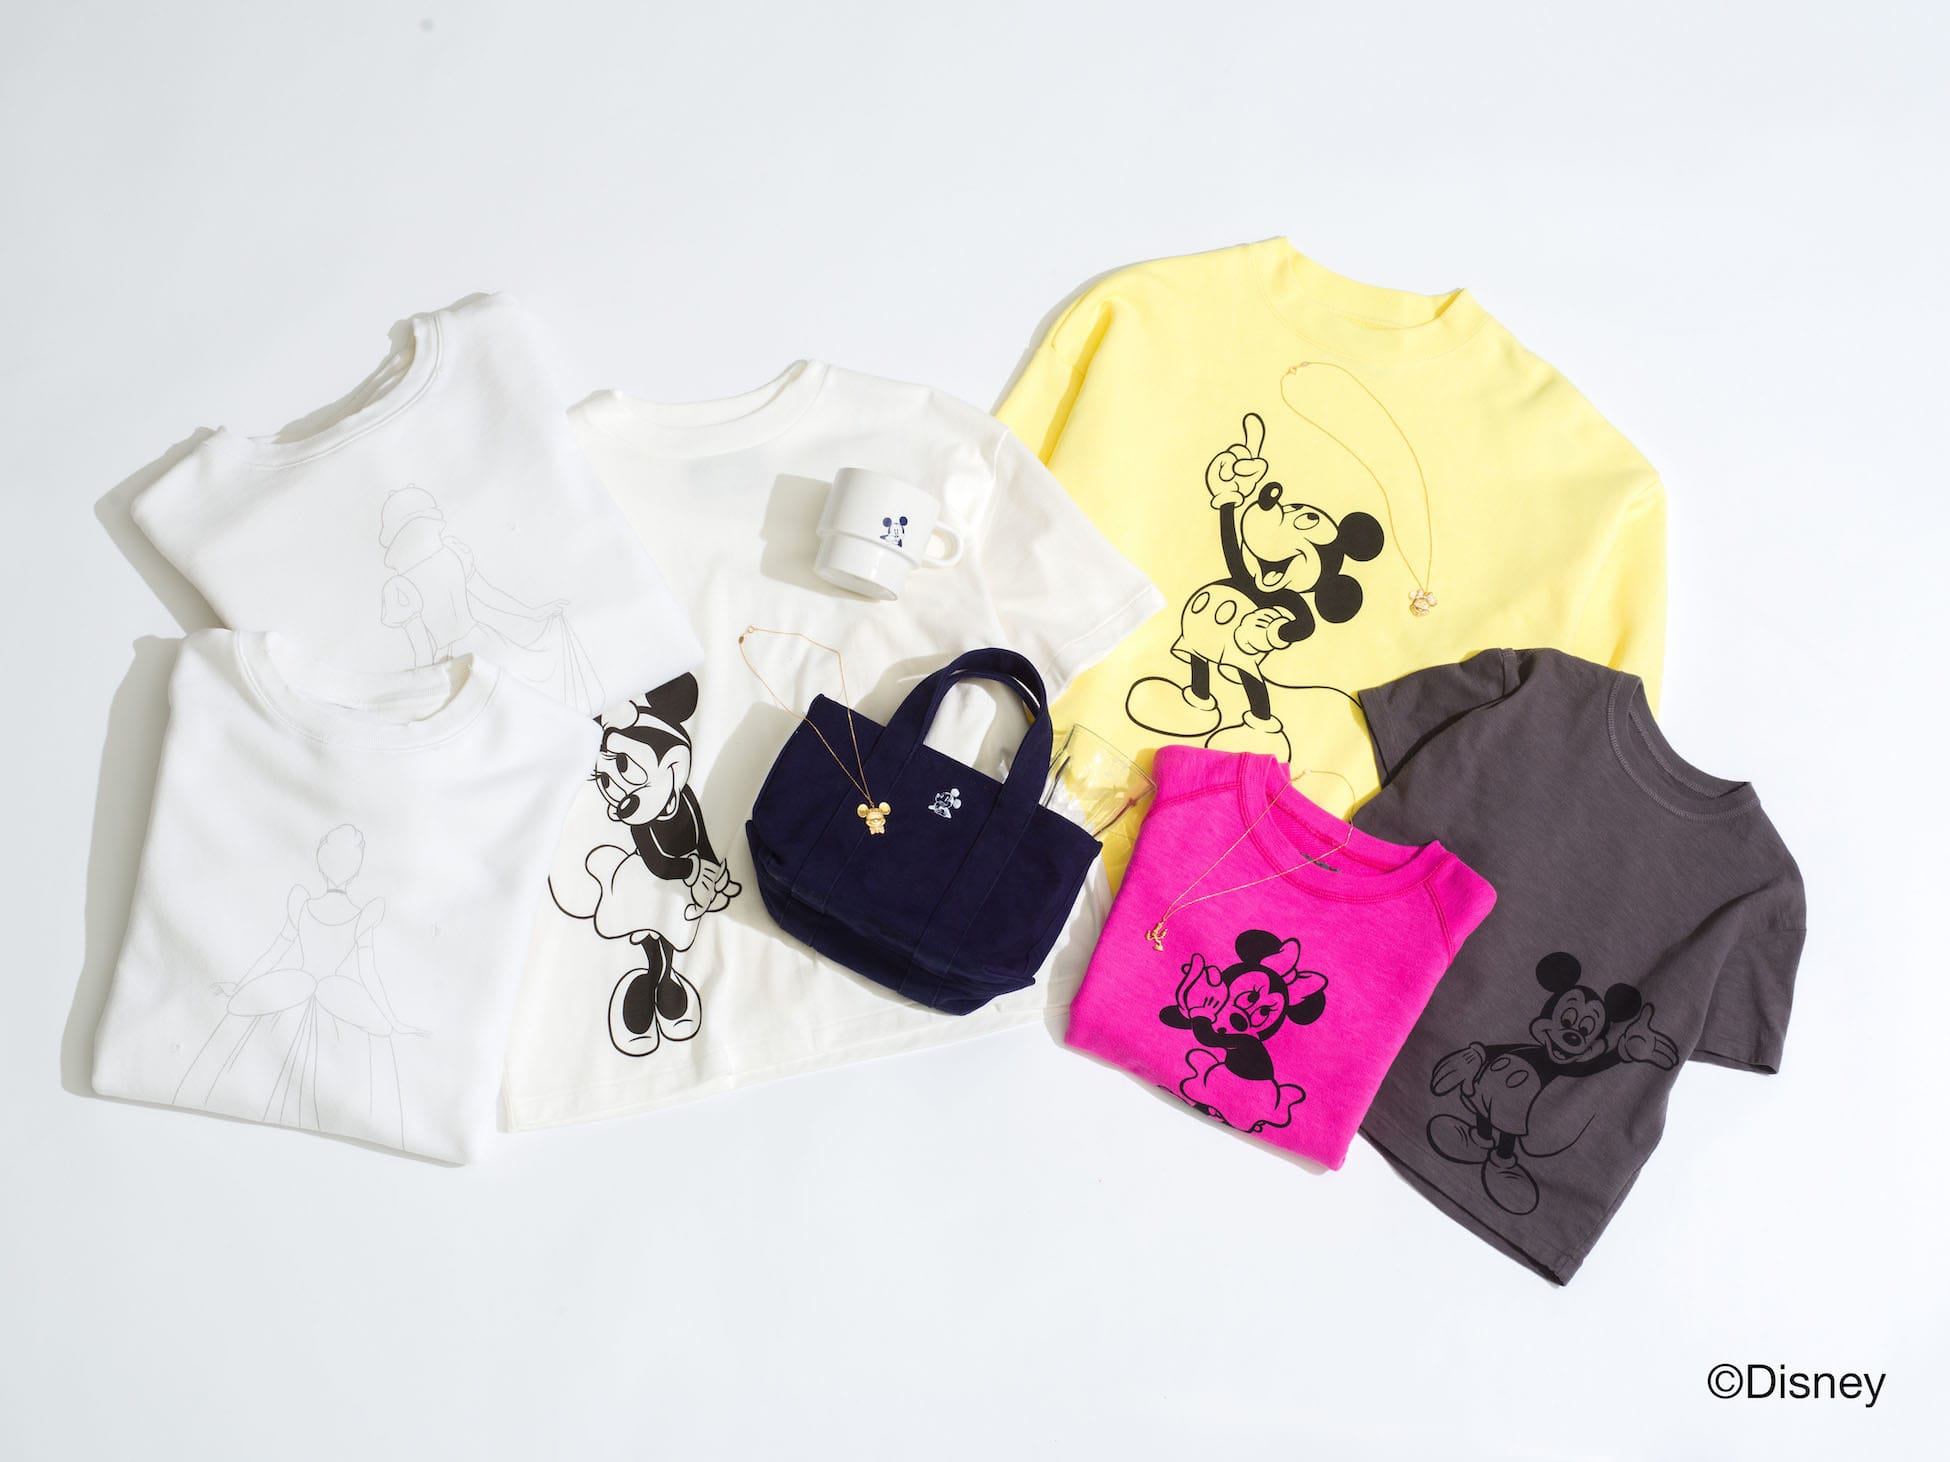 Disney Special Collection 9.30(Sat) Coming Soon!